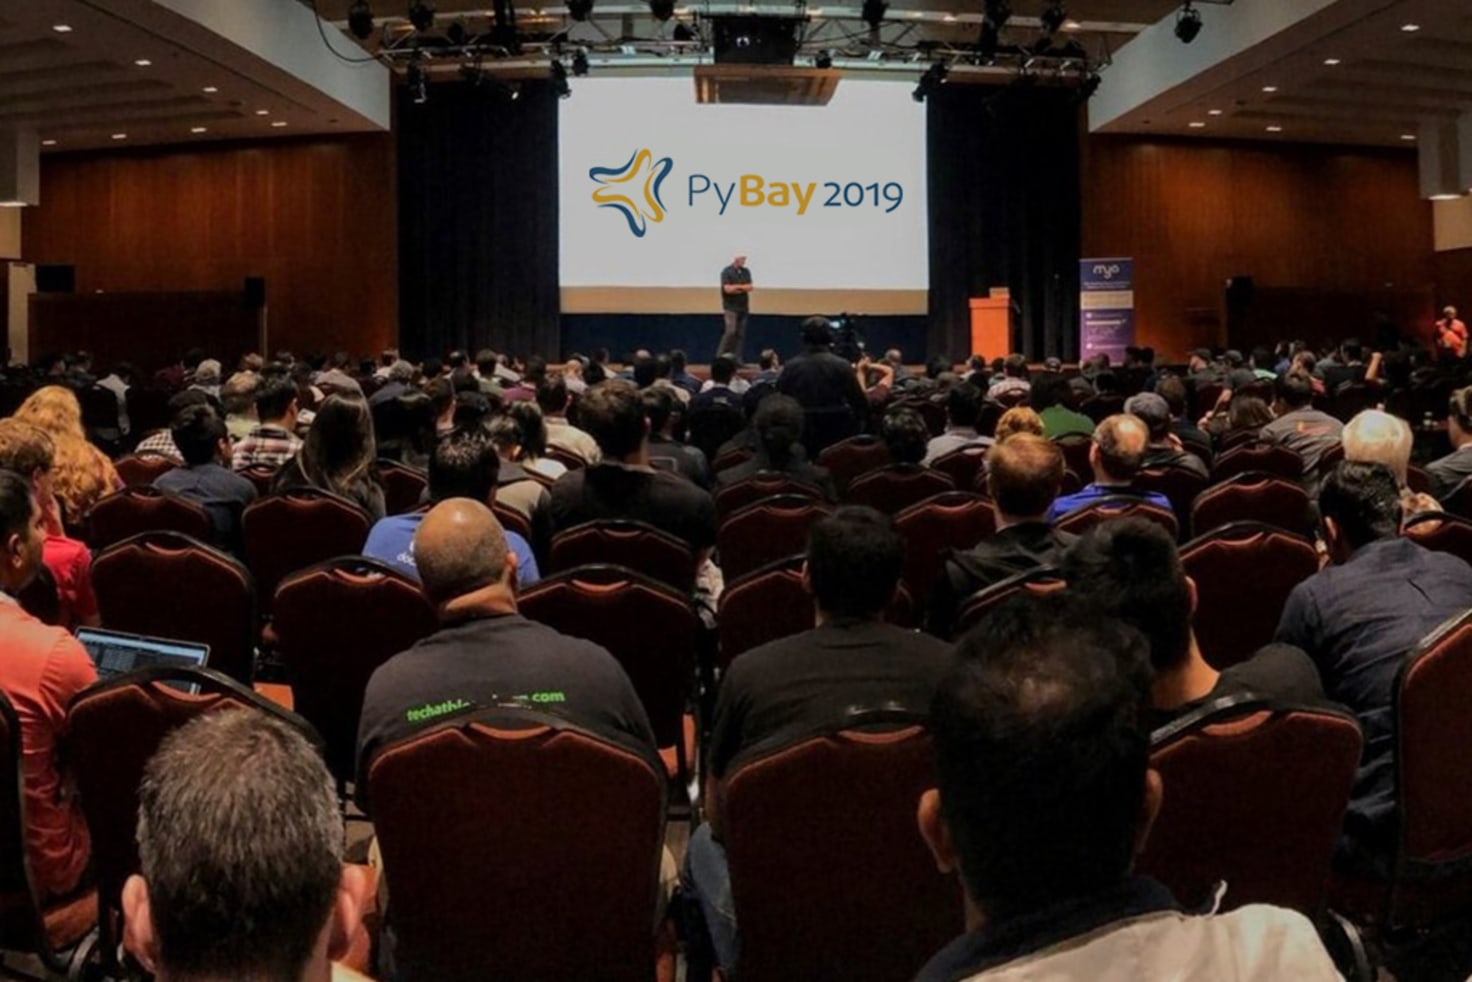 Panel members of the Python Steering Council engaged in a thoughtful discussion at PyBay2019, with audience members in attendance, reflecting the collaborative spirit of the Python community.